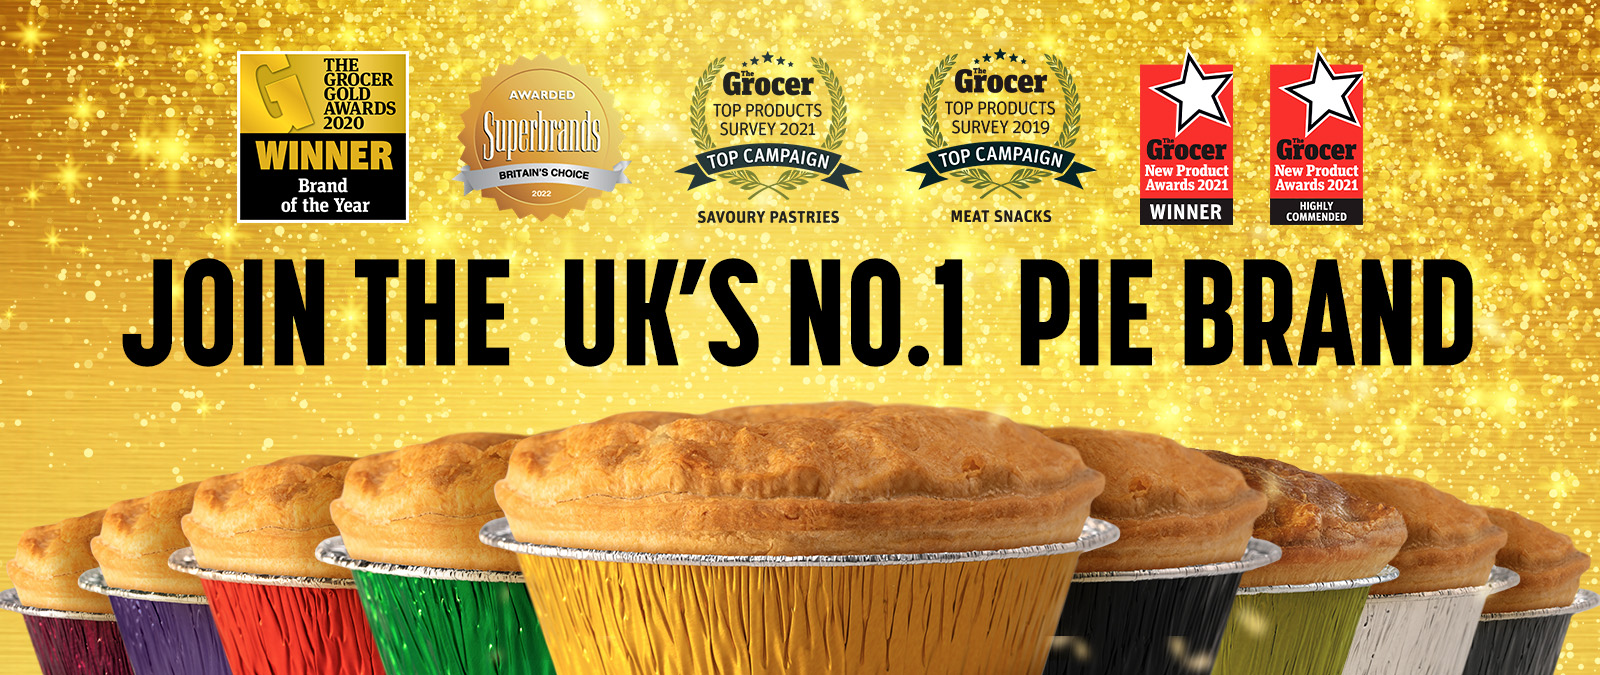 Join the Uk's no.1 pie brand